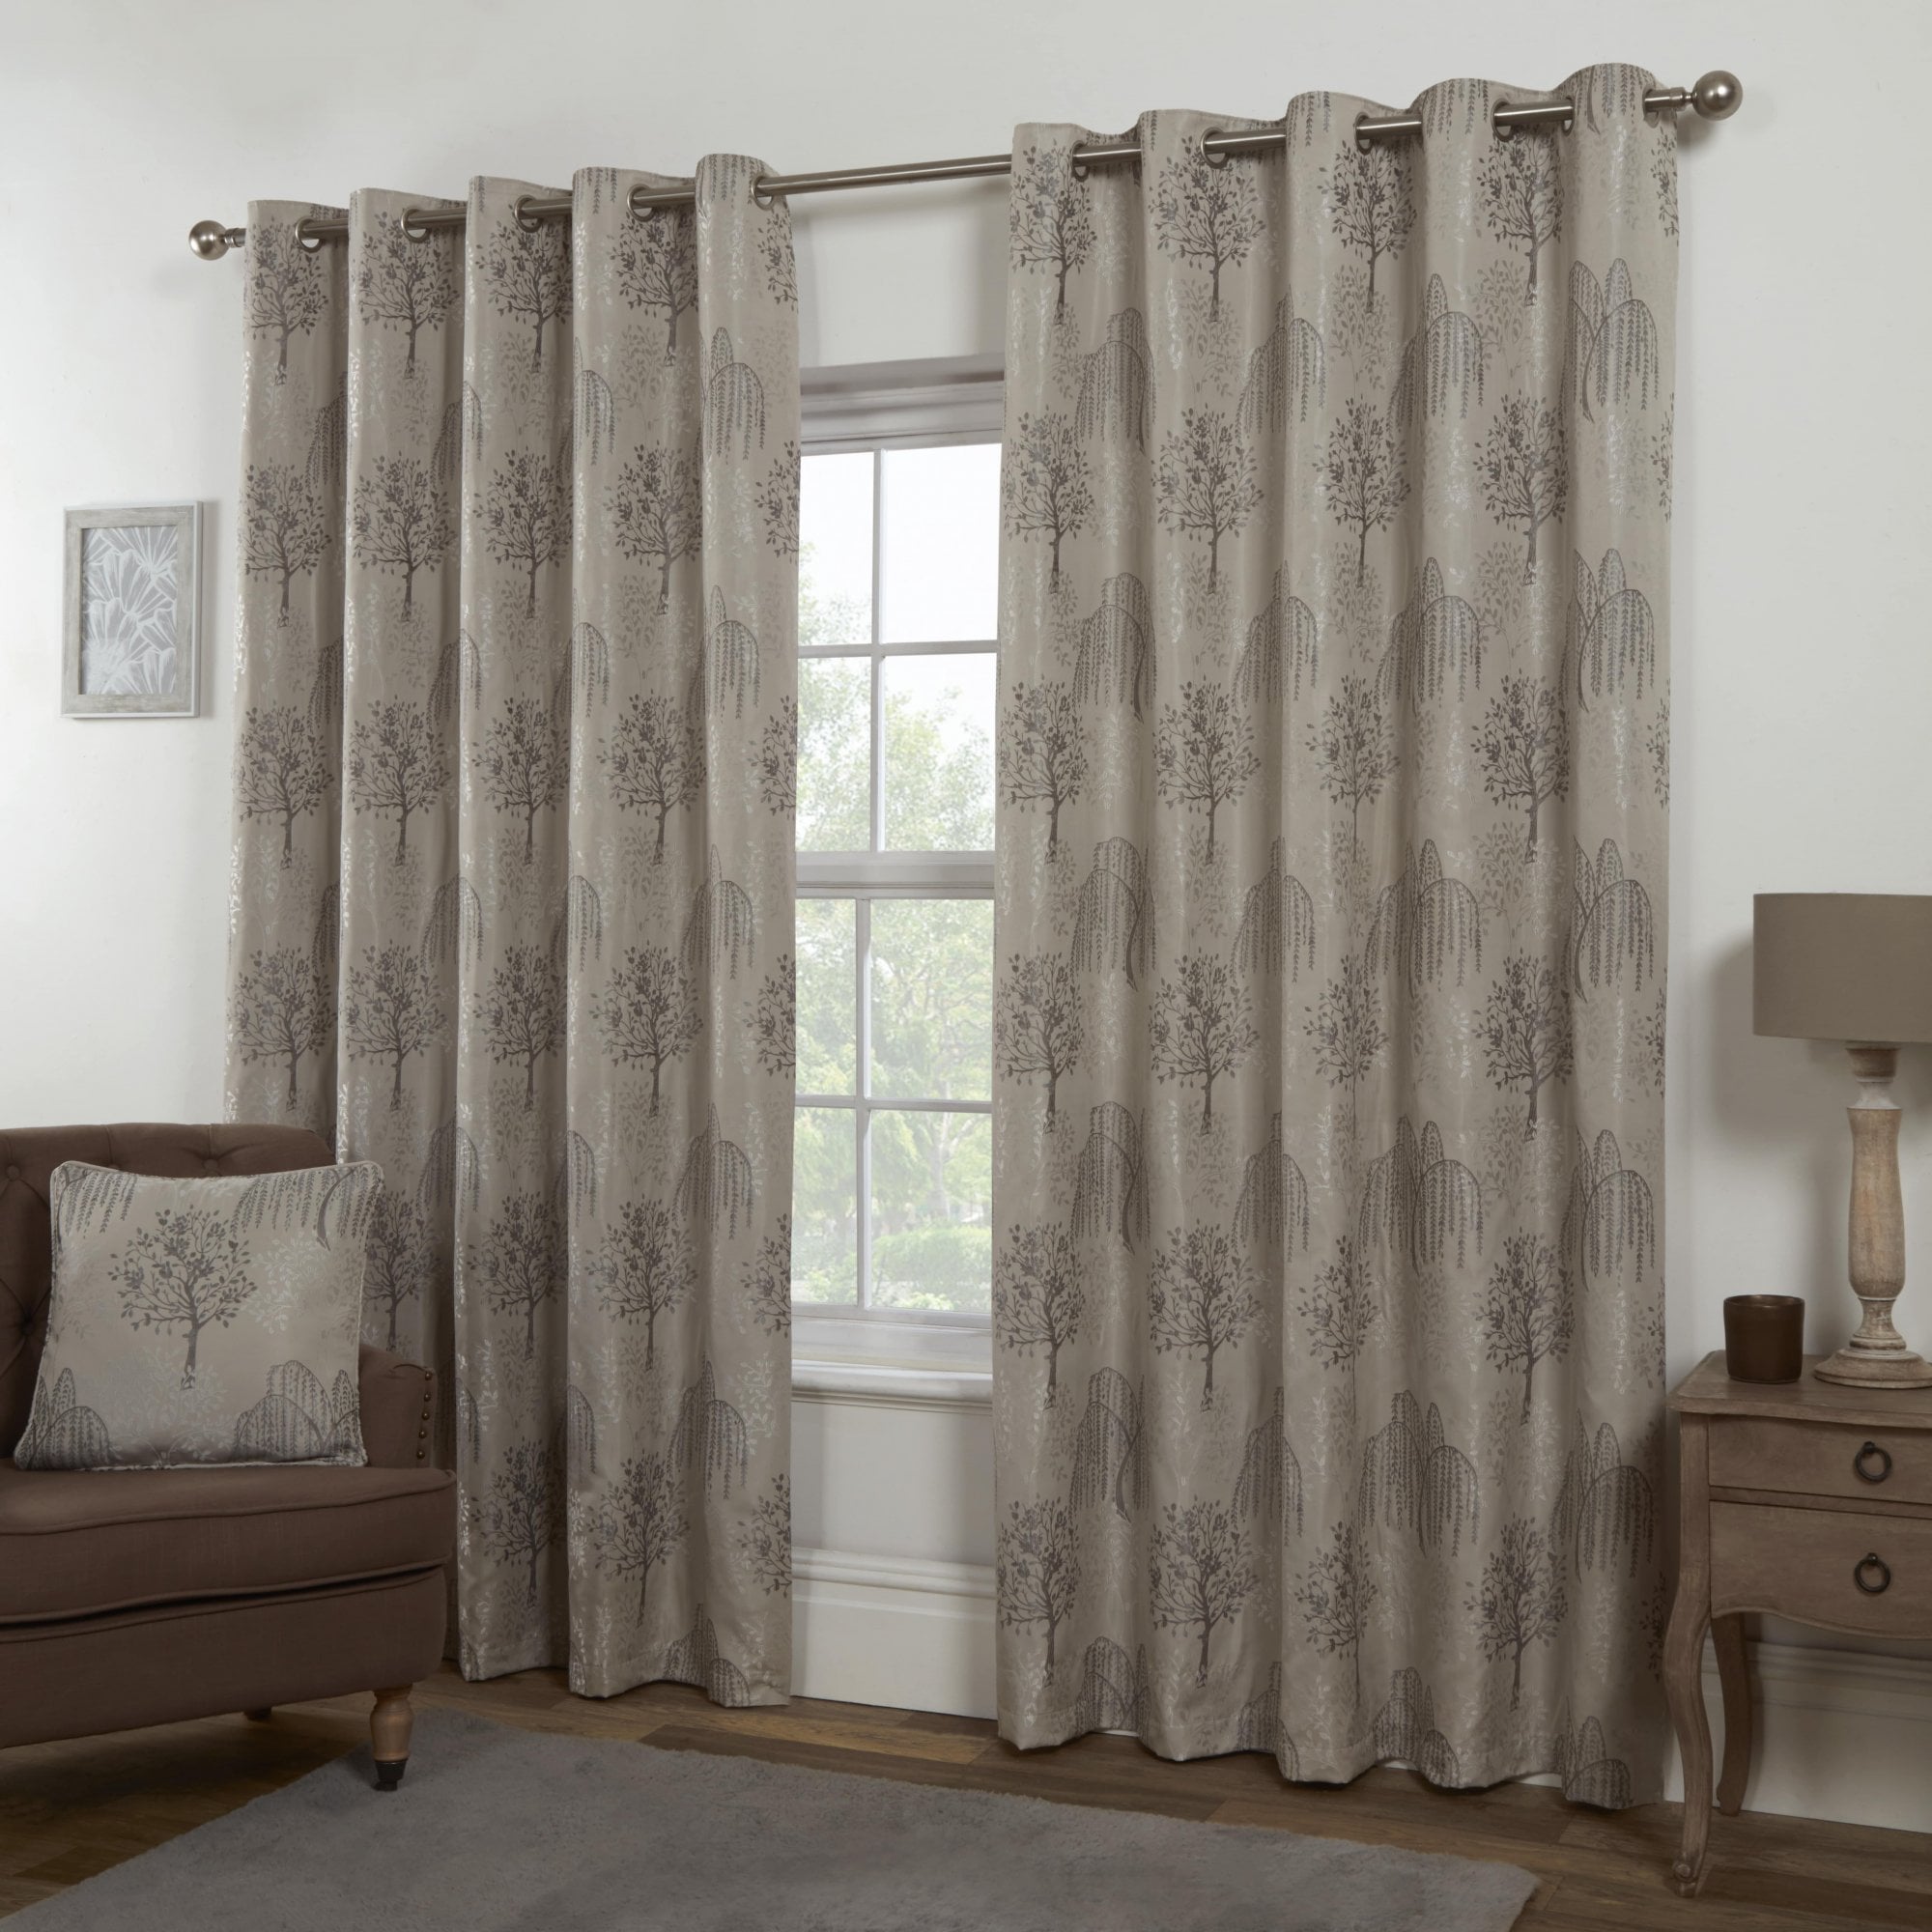 Lewis’s Orchard Patterned Eyelet Curtains - Silver - 229cm (90") X 183cm (72")  | TJ Hughes